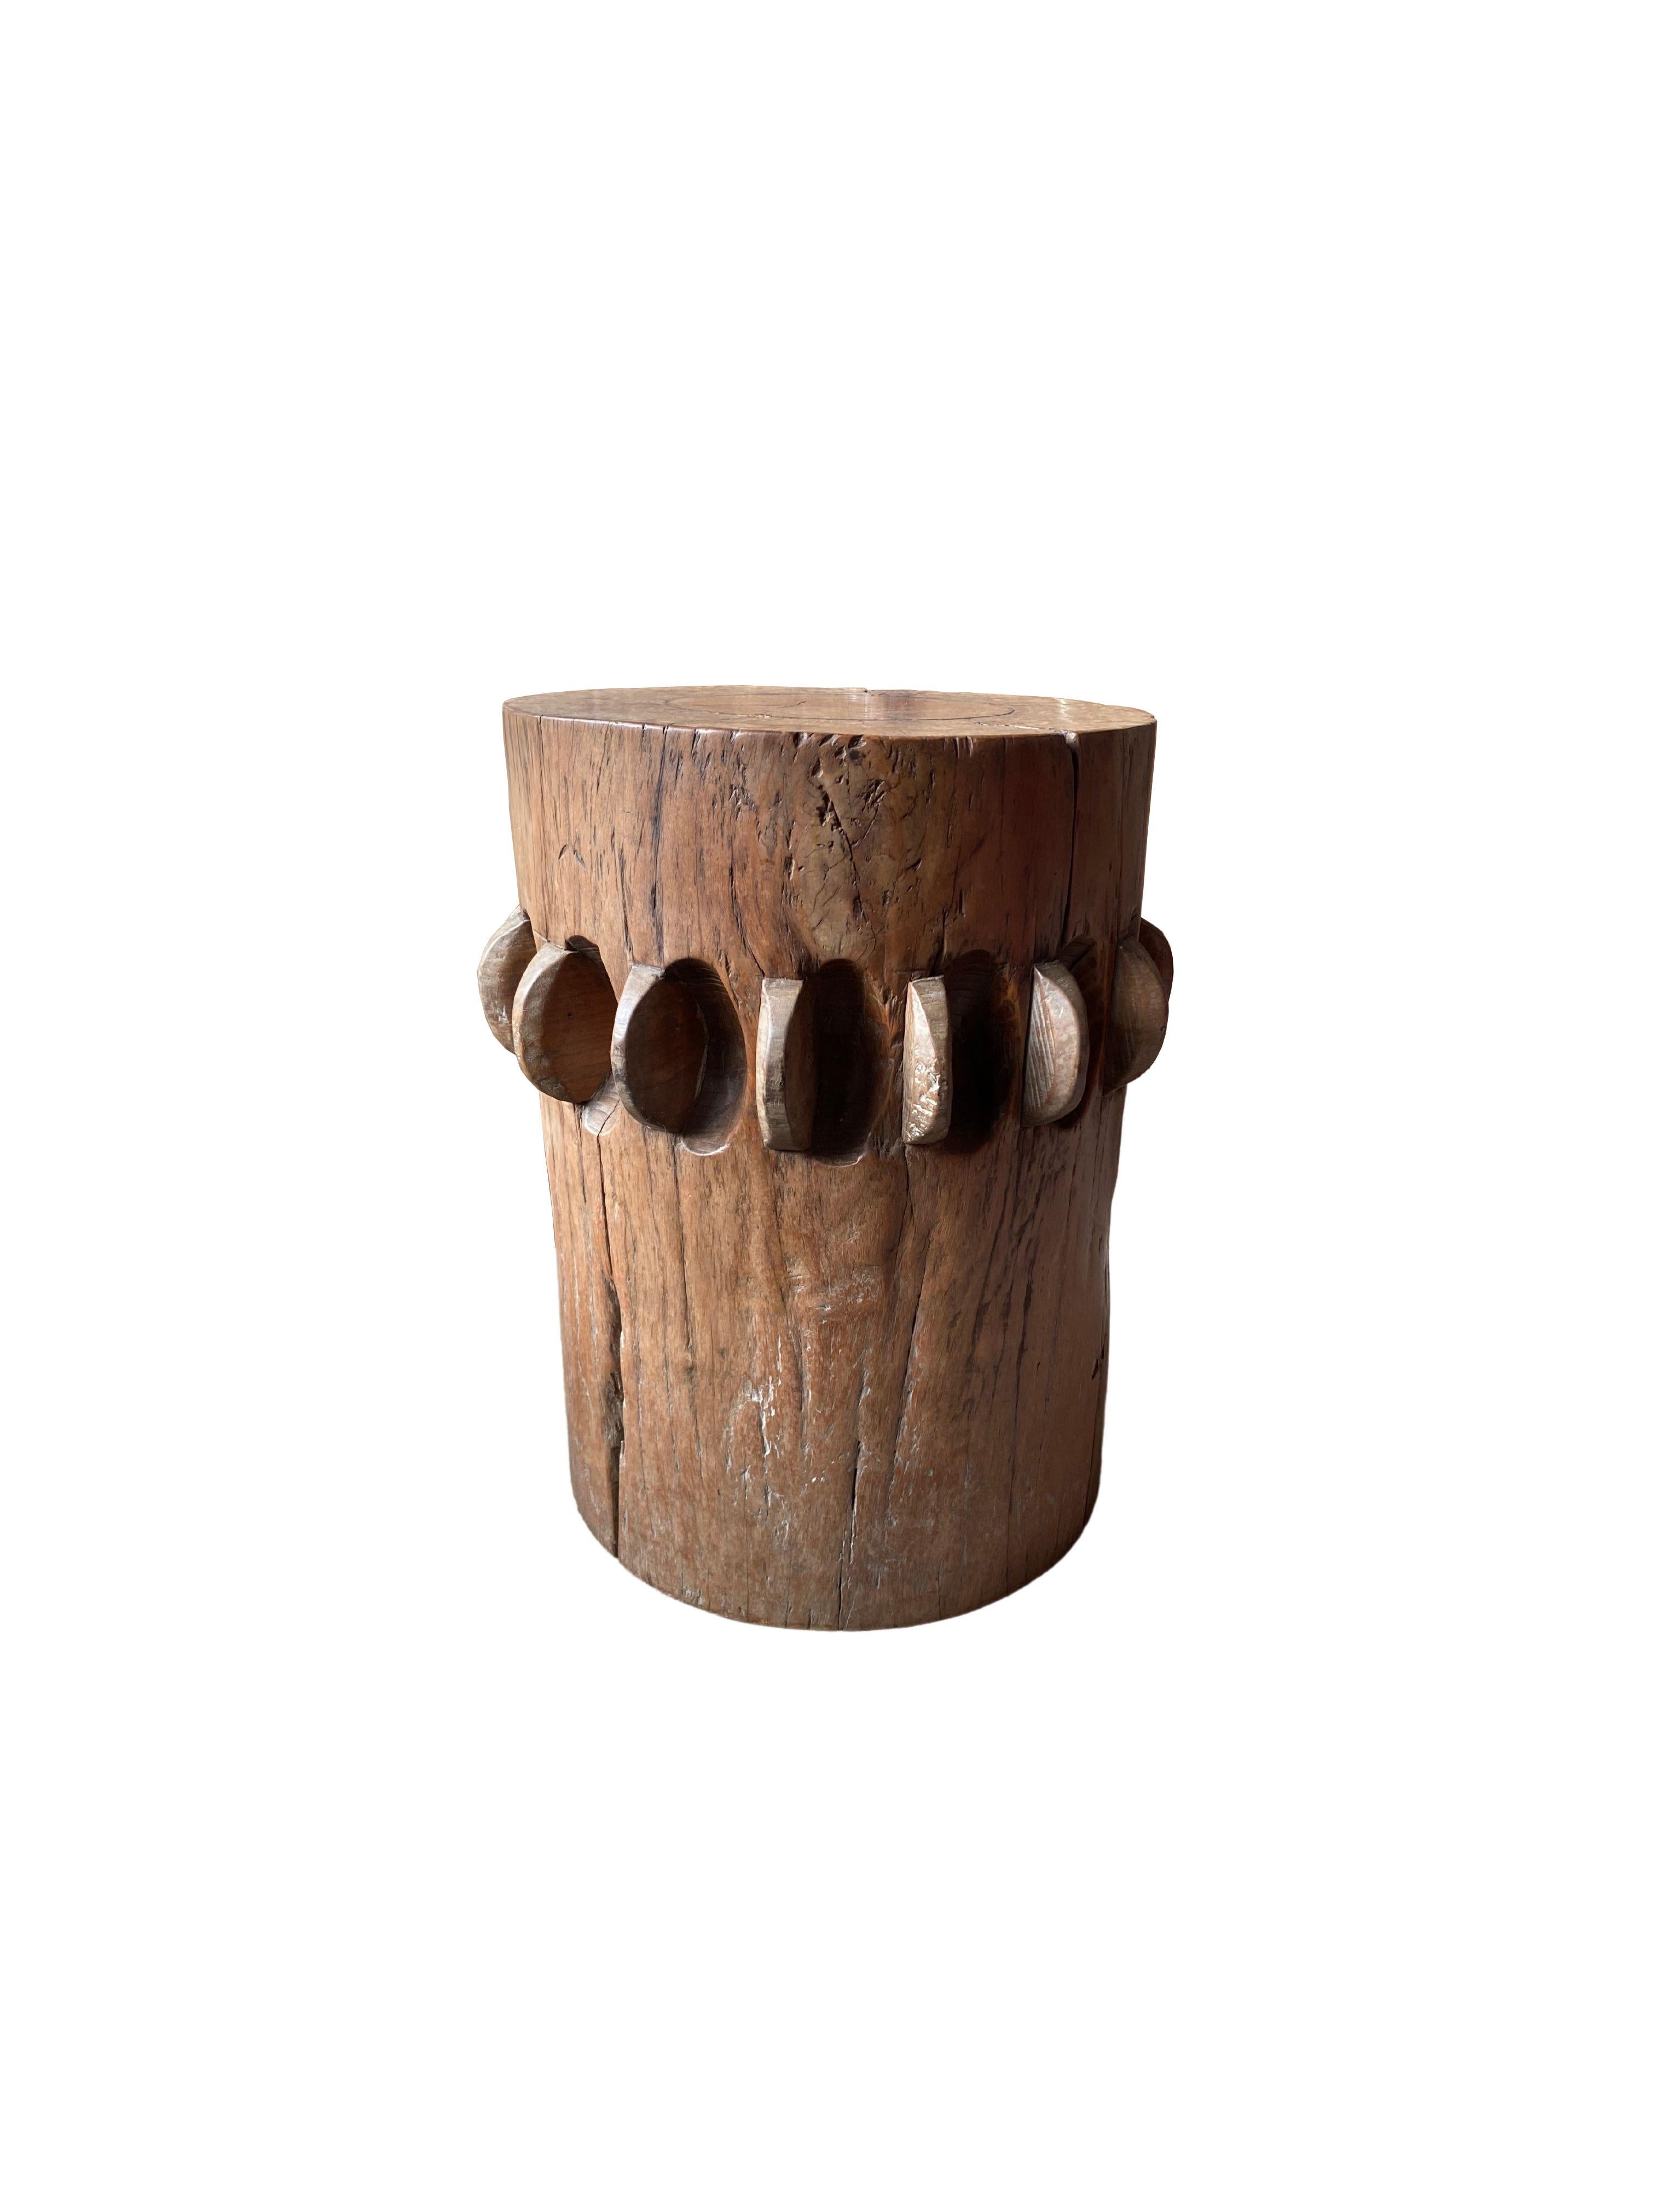 Hand-Crafted Solid Teak Sugar Cane Crusher / Grinder from Java, Indonesia c. 1950 For Sale